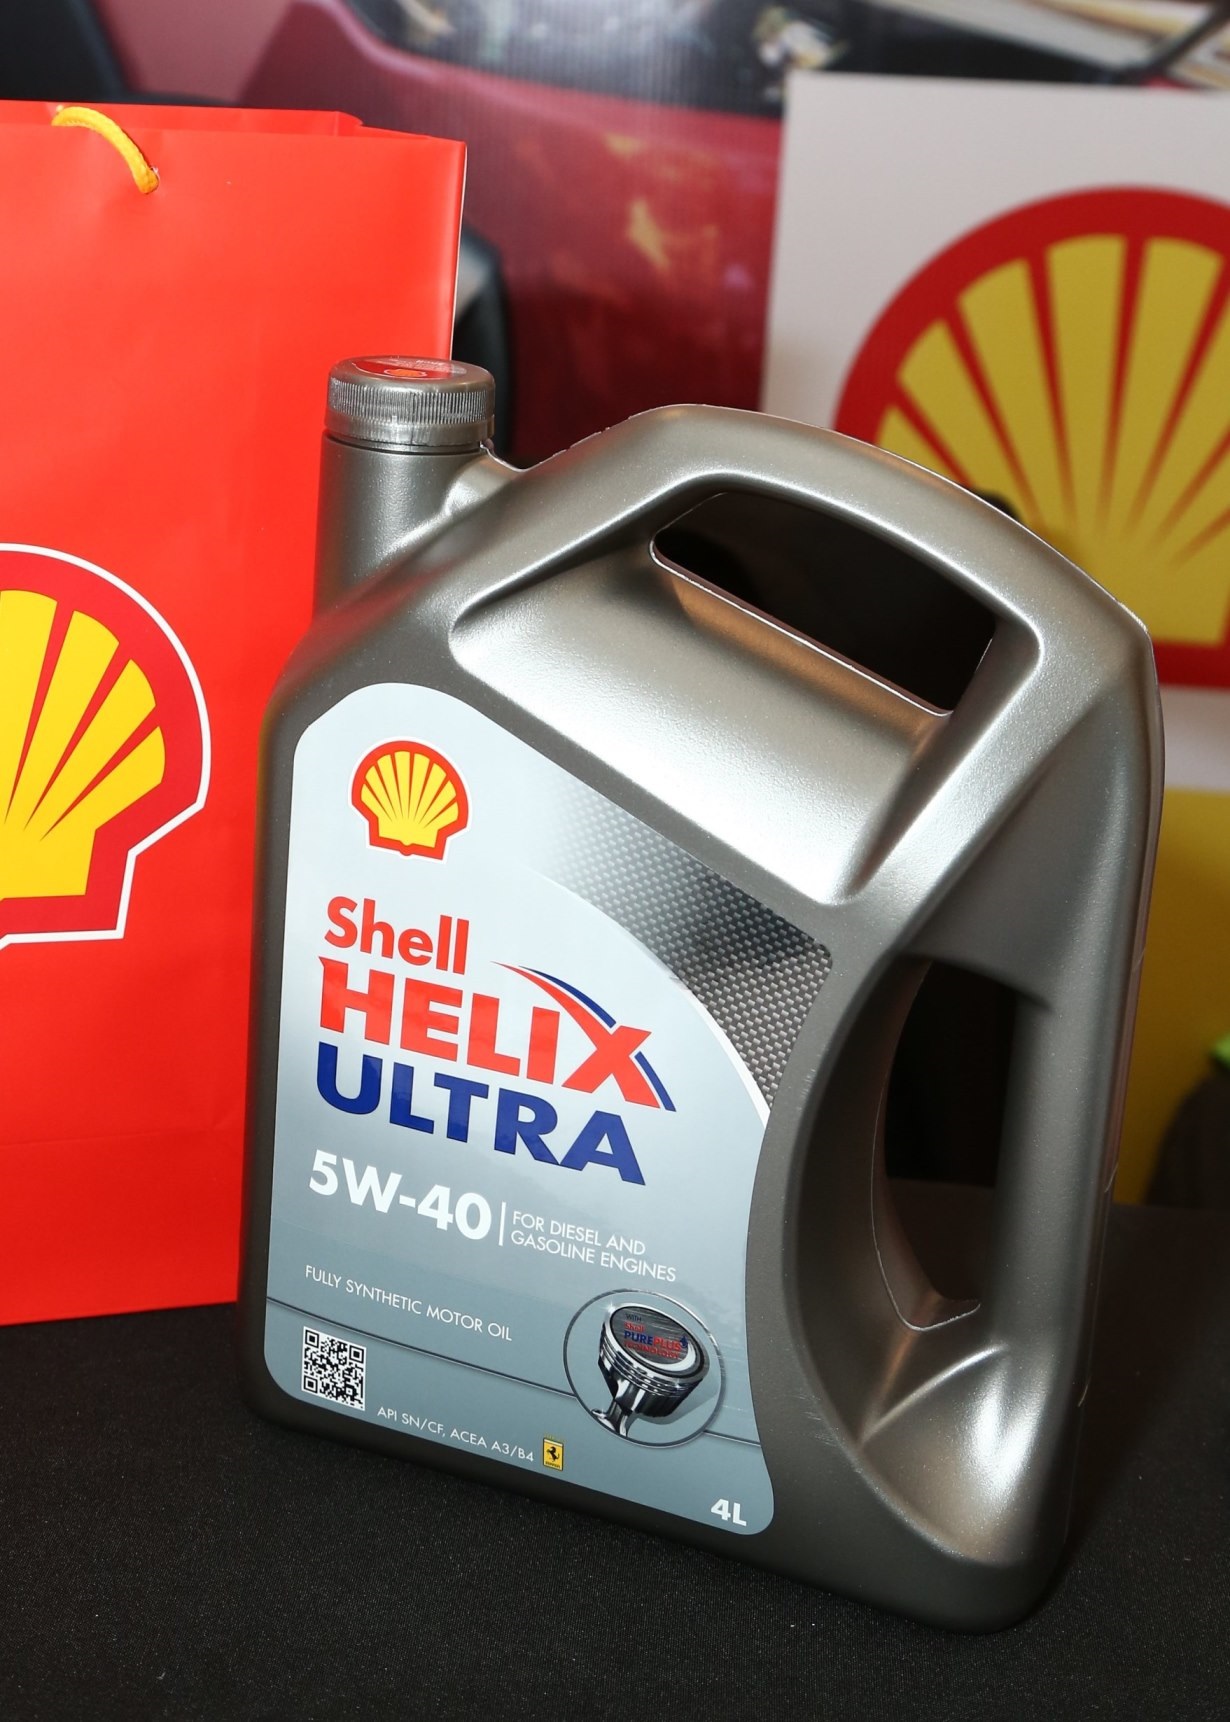 The fully synthetic Shell Helix Ultra with PurePlus Technology now comes with FREE engine warranty